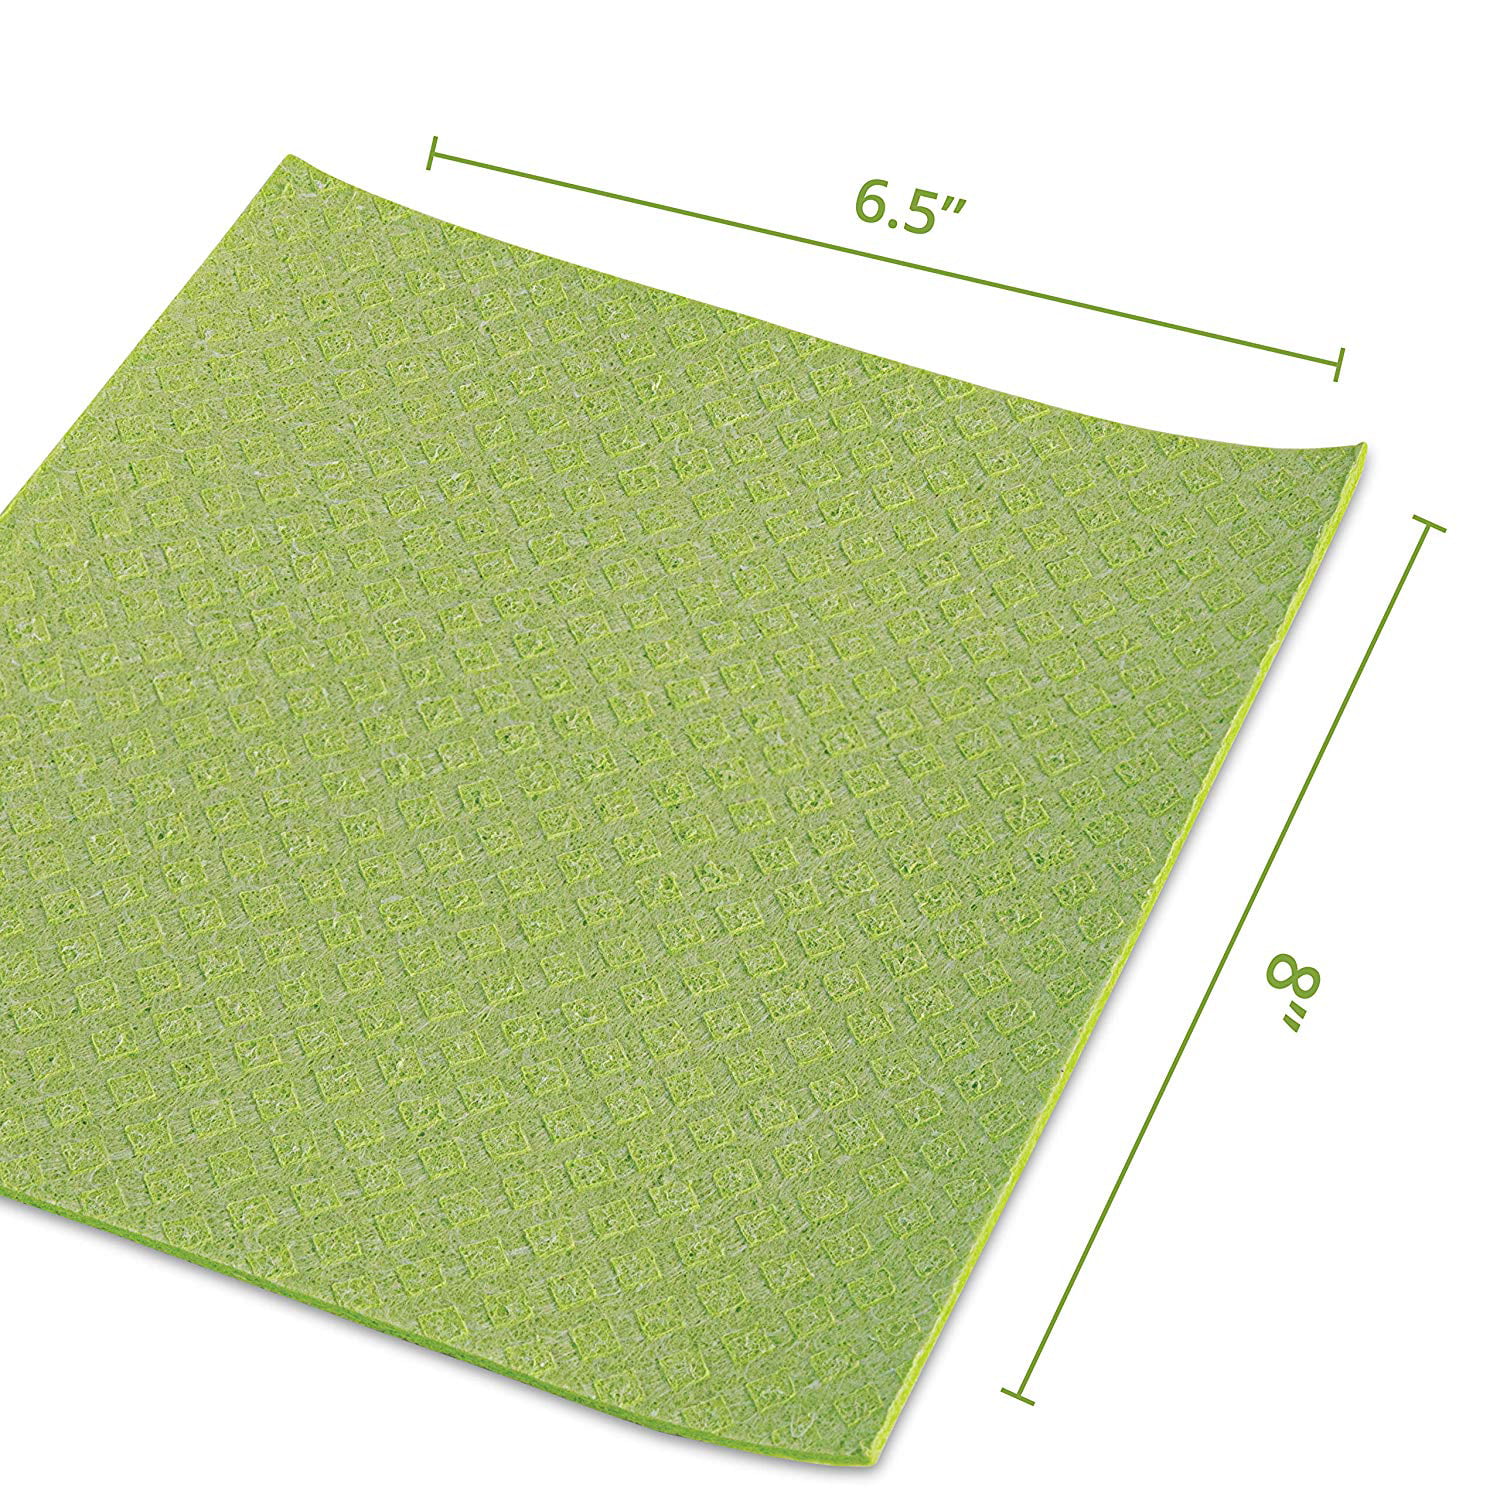 Swedish Recycled Cotton Waffle Weave Cleaning Dish Cloth with Green Stripe  22 x 18 - The Foundry Home Goods